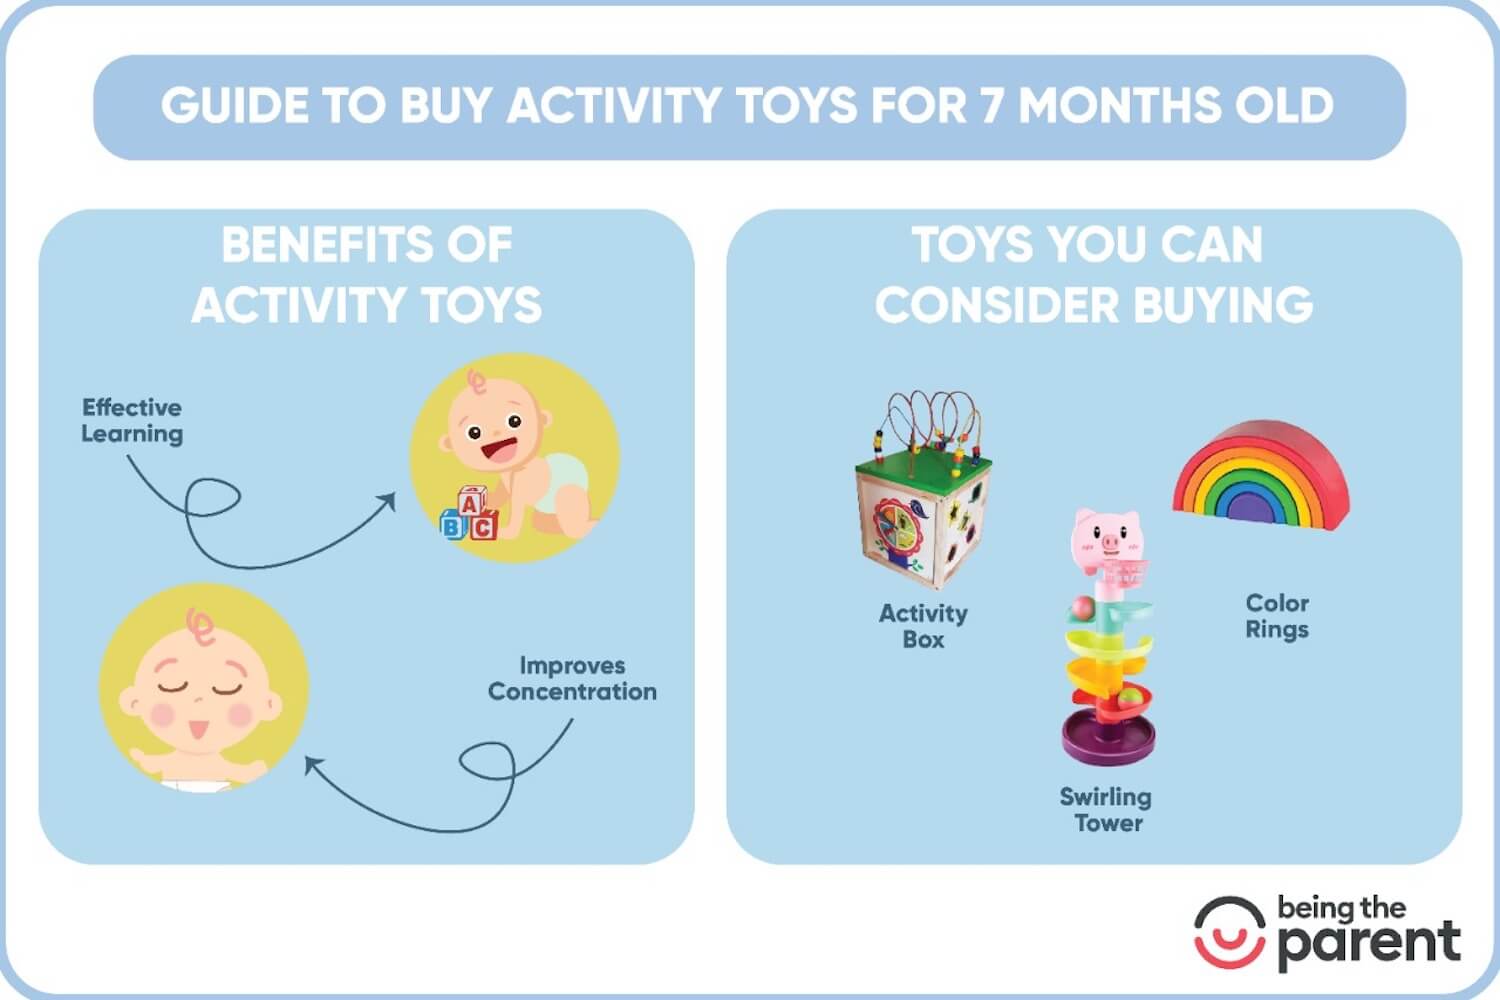 Activity toys for 7 month old